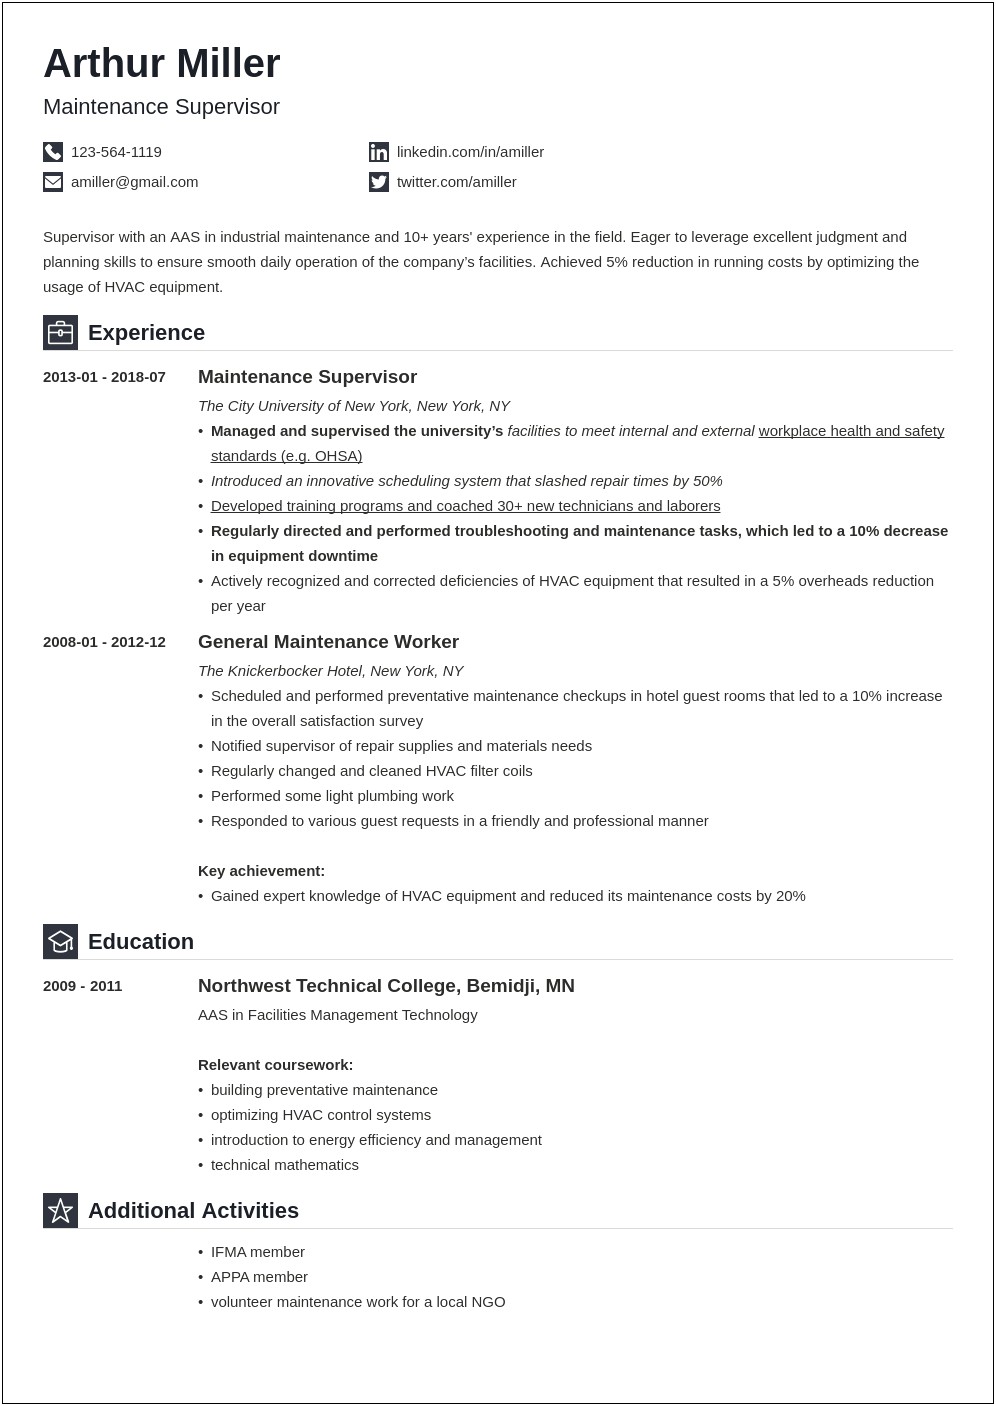 Best Resume For Maintenance But No Formal Education